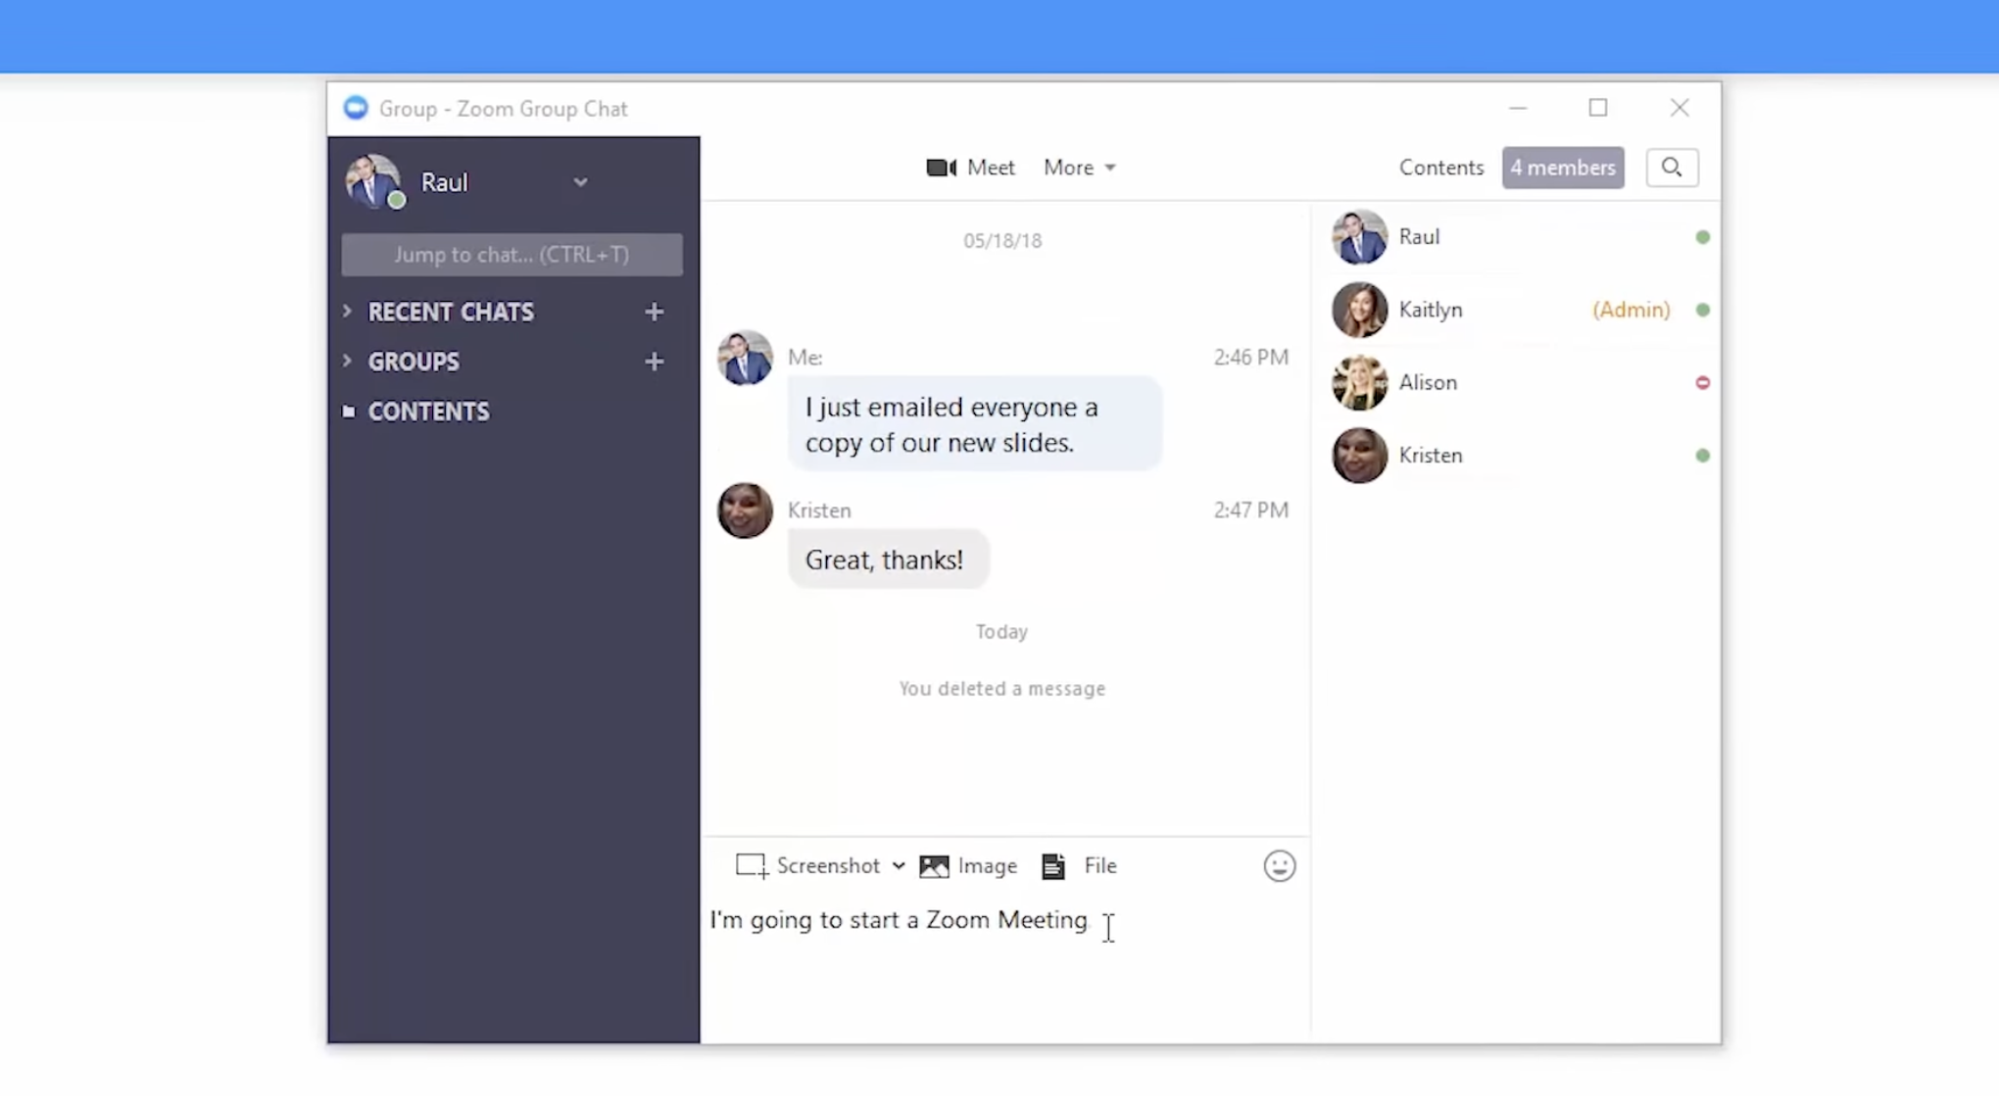 Zoom’s built-in cross-platform group chat